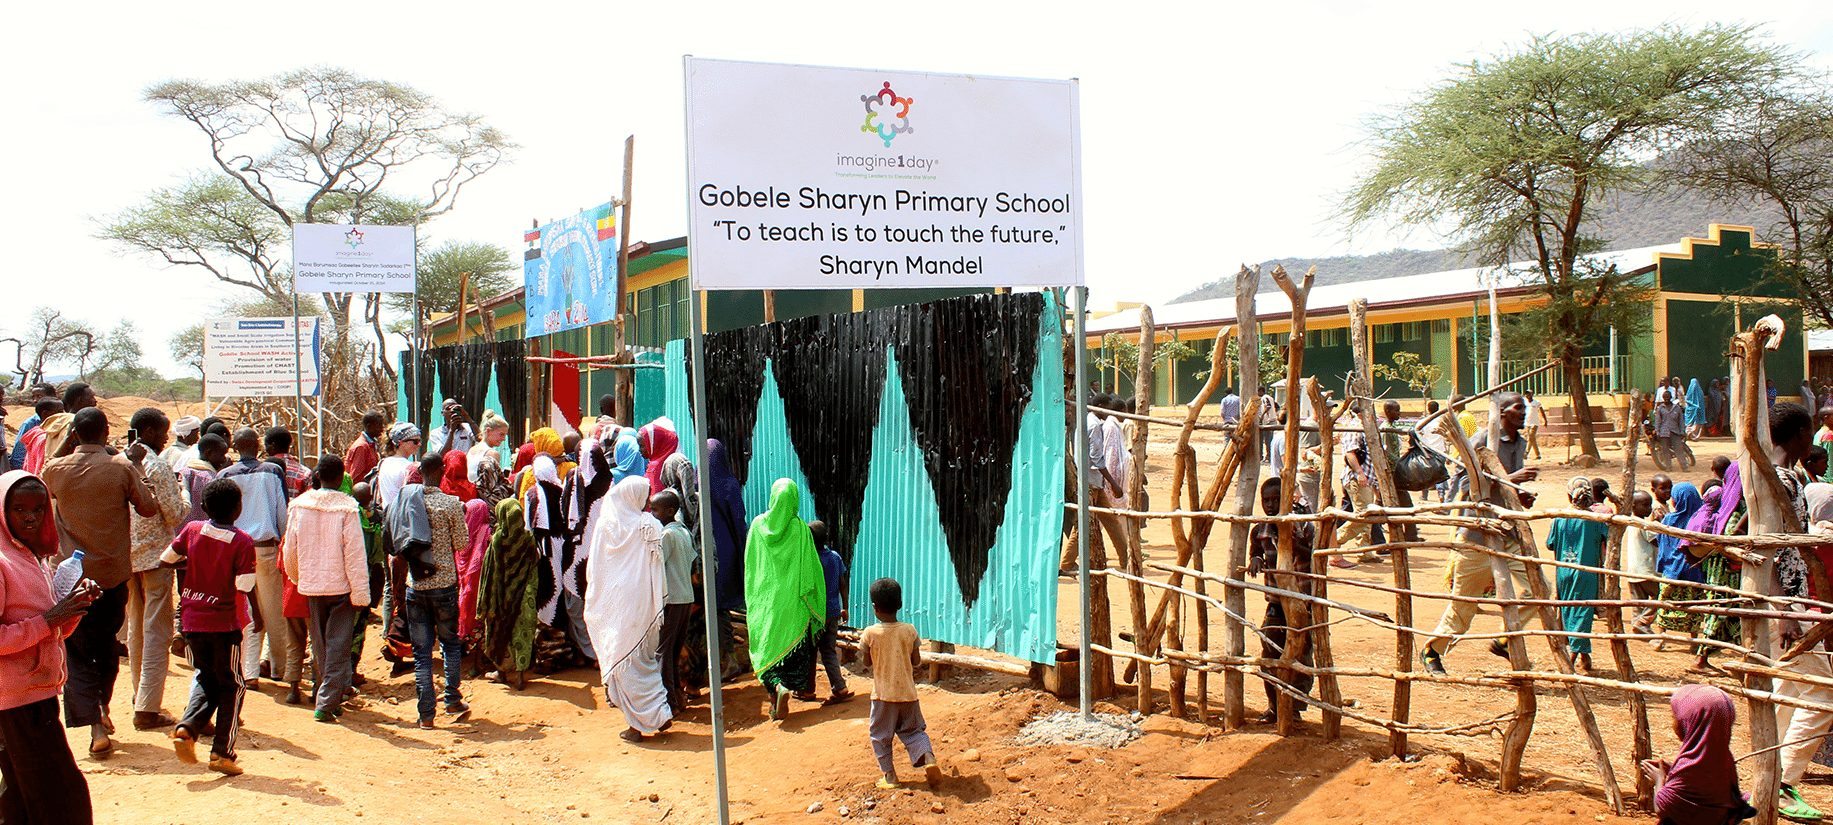 The front gate to the Gobele Sharyn Mandel Primary School, with a sign that quotes "To teach is to touch the future".